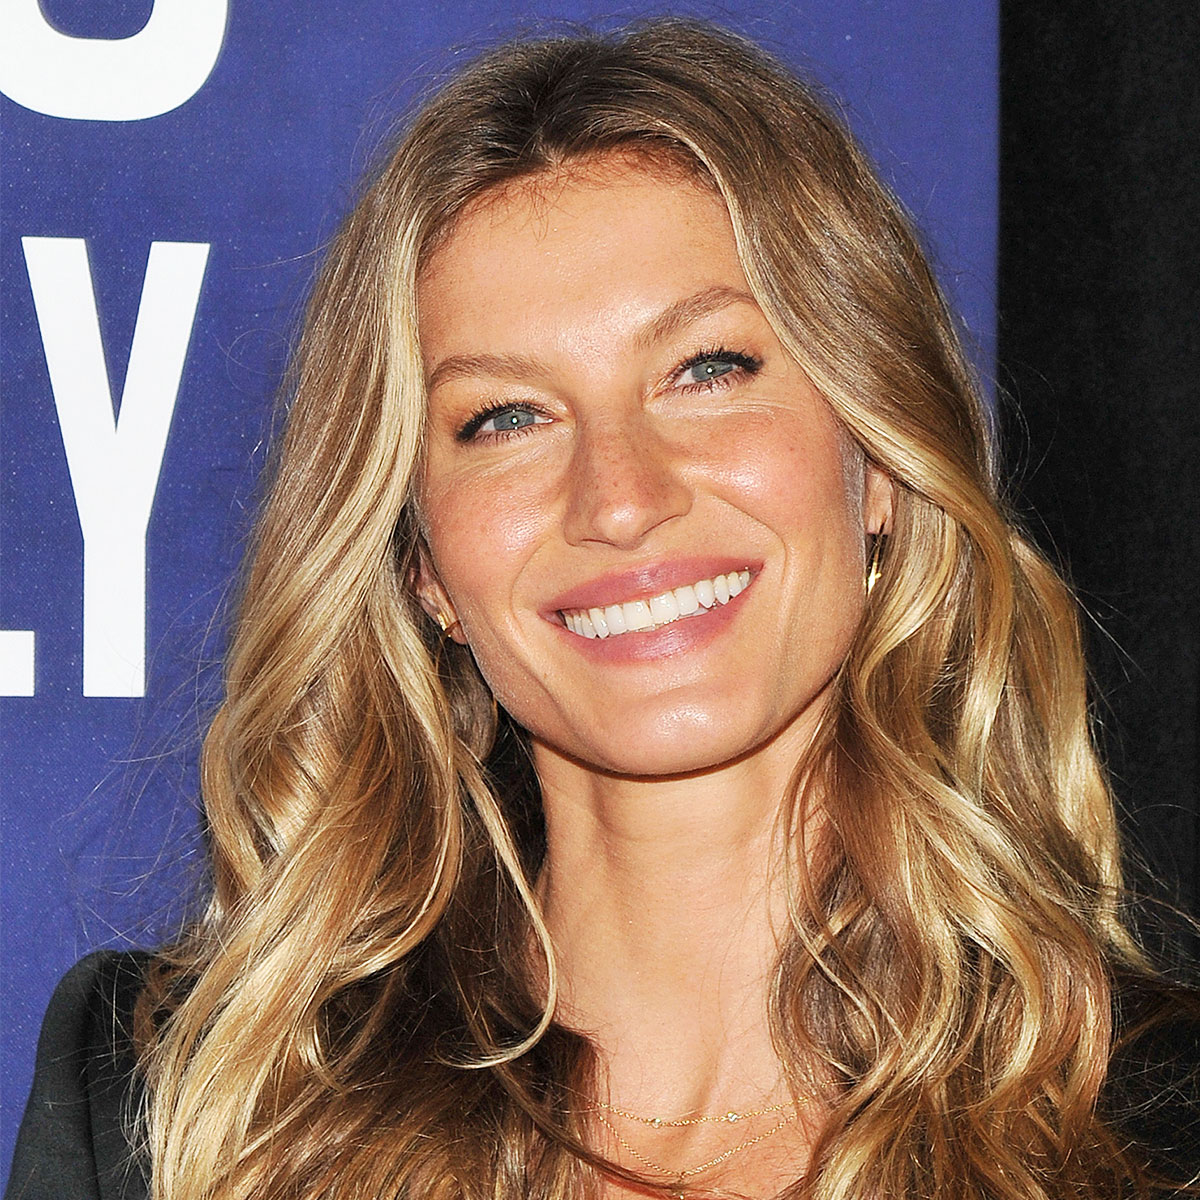 Gisele Bündchen just gave a preview of the eveningwear trend we'll see  everywhere this autumn